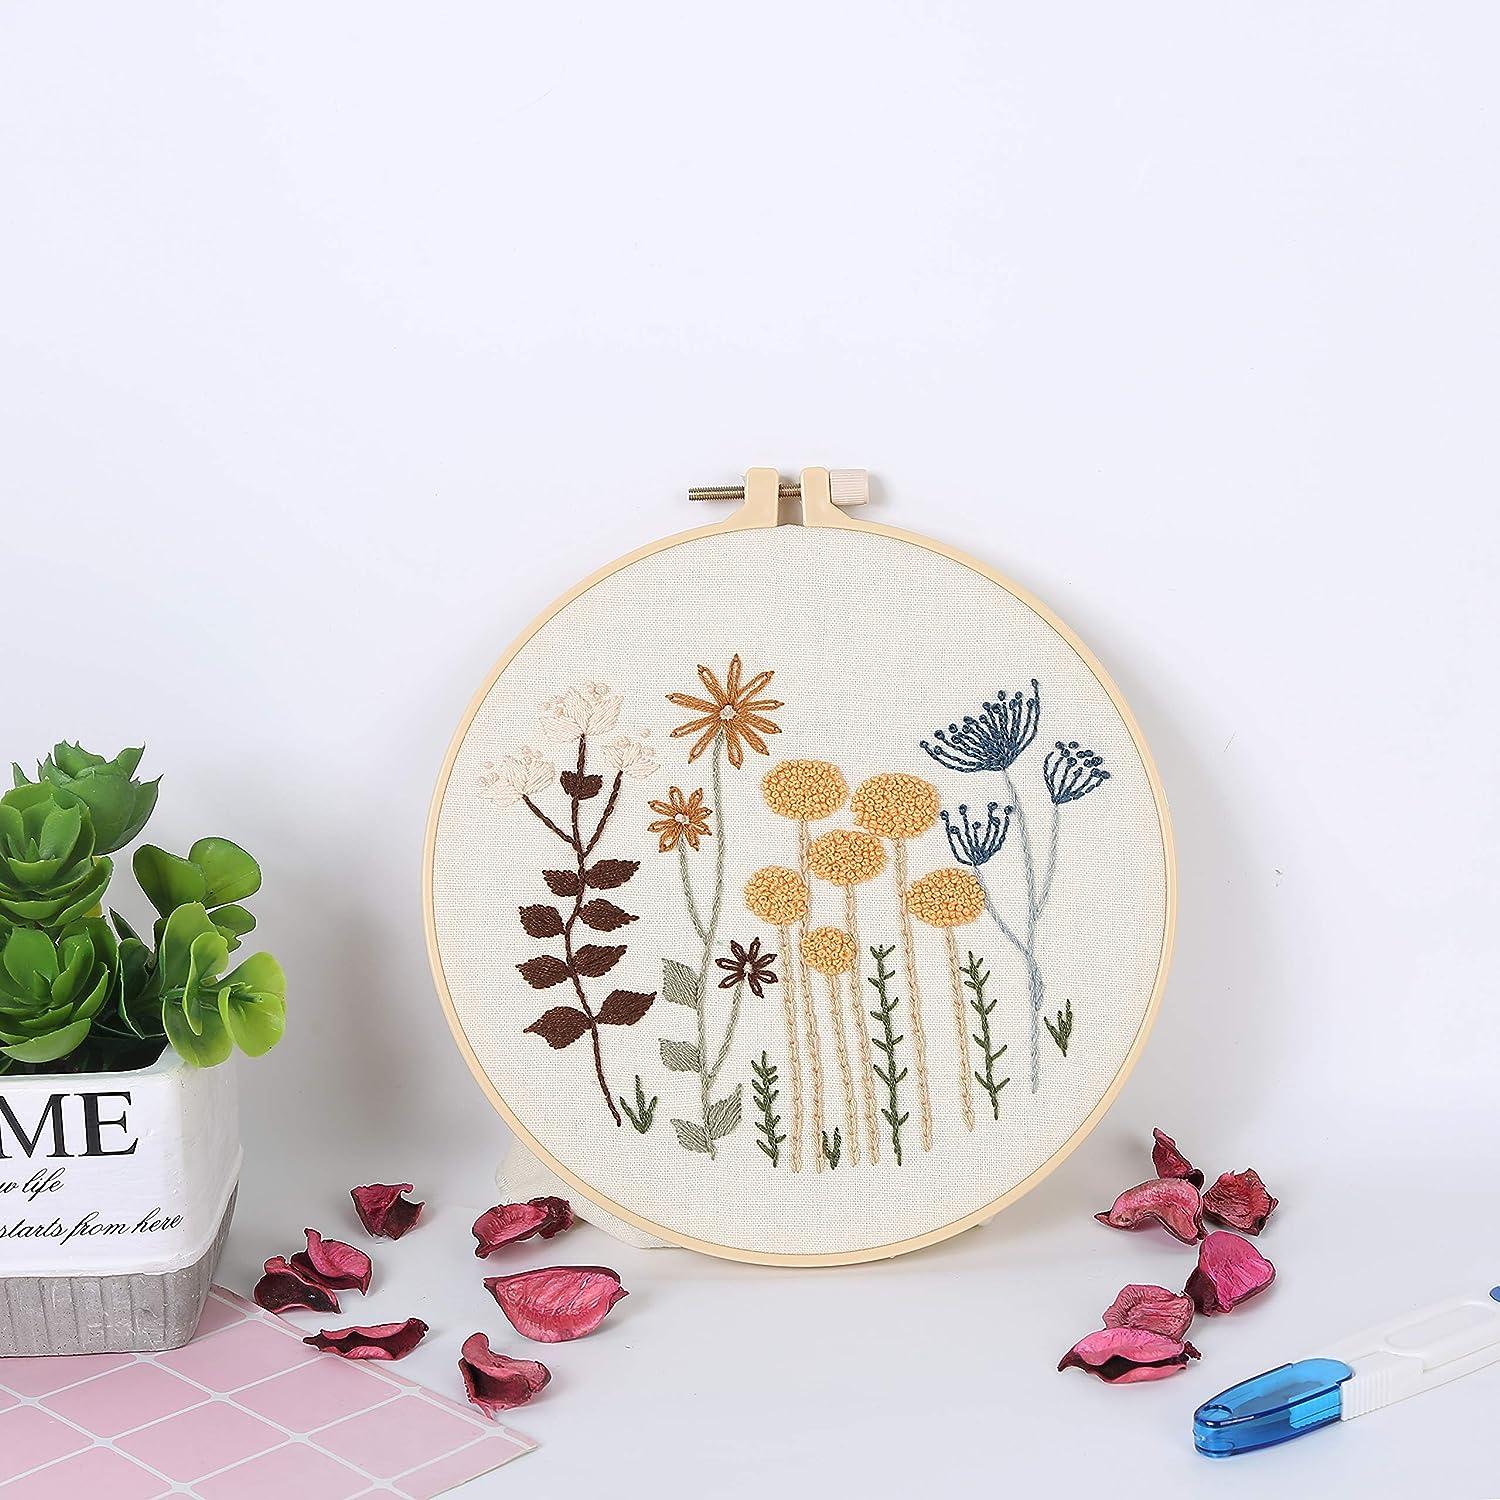 Full Range of Embroidery Starter Kits, Floral Handmade Needlepoint Kits with Pattern for DIY Beginners Adults Kids, Valentine's, Size: 20 cm